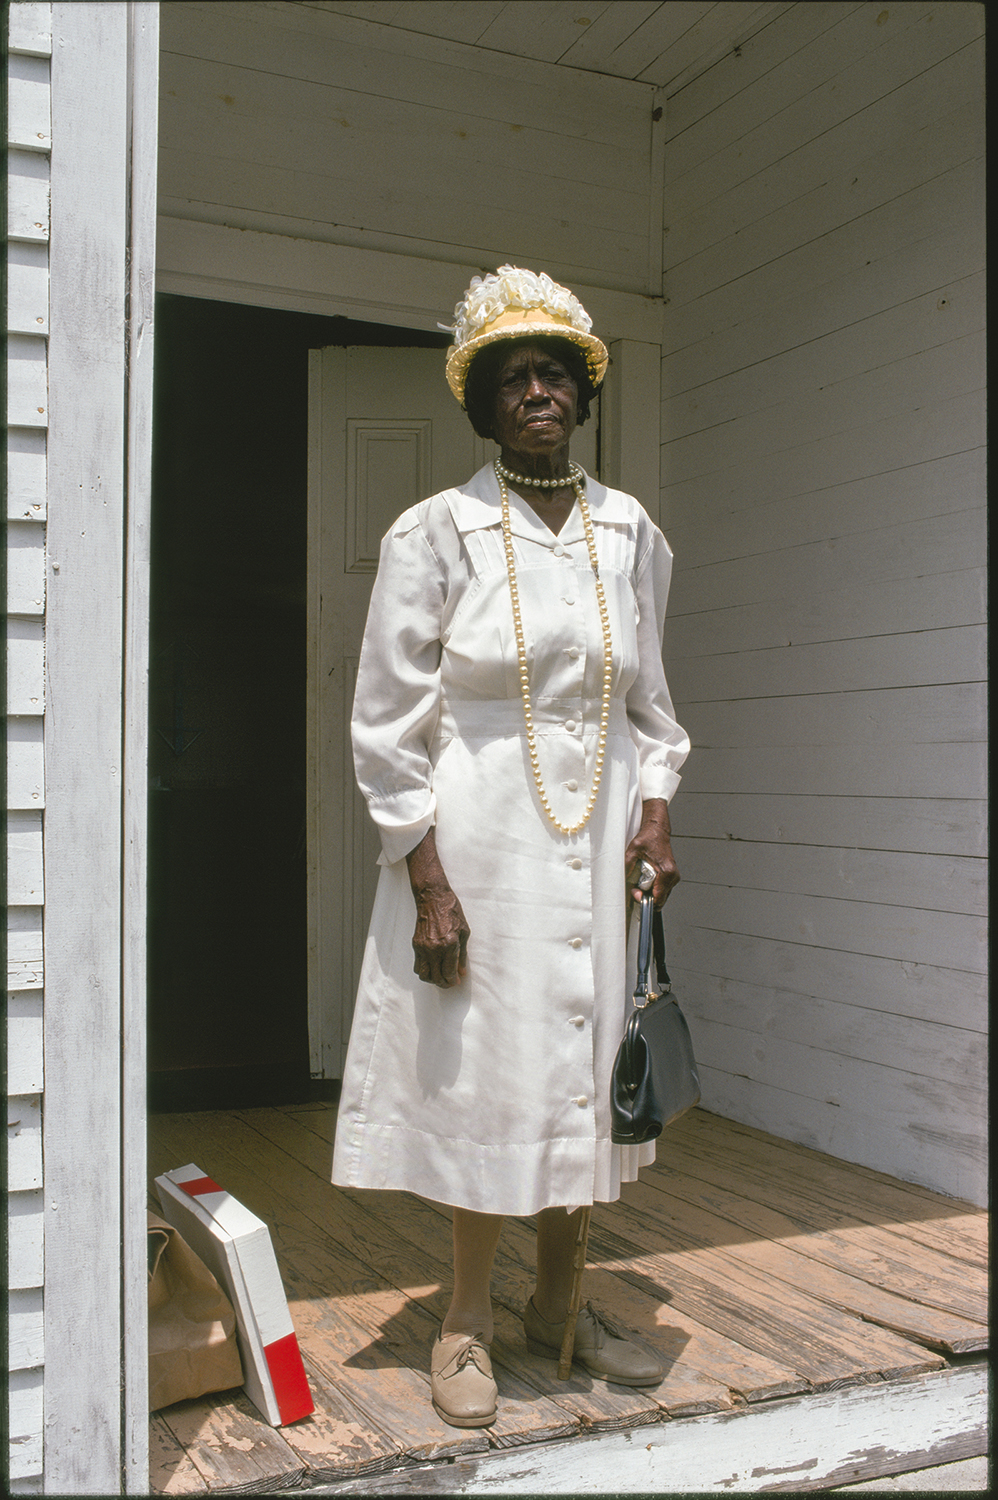   Amanda Gordon, Rose Hill Church, Fisher Ferry Road, Warren County, Mississippi , 1975 20 × 13 in. (image size) The Do Good Fund, Inc., 2016-157 